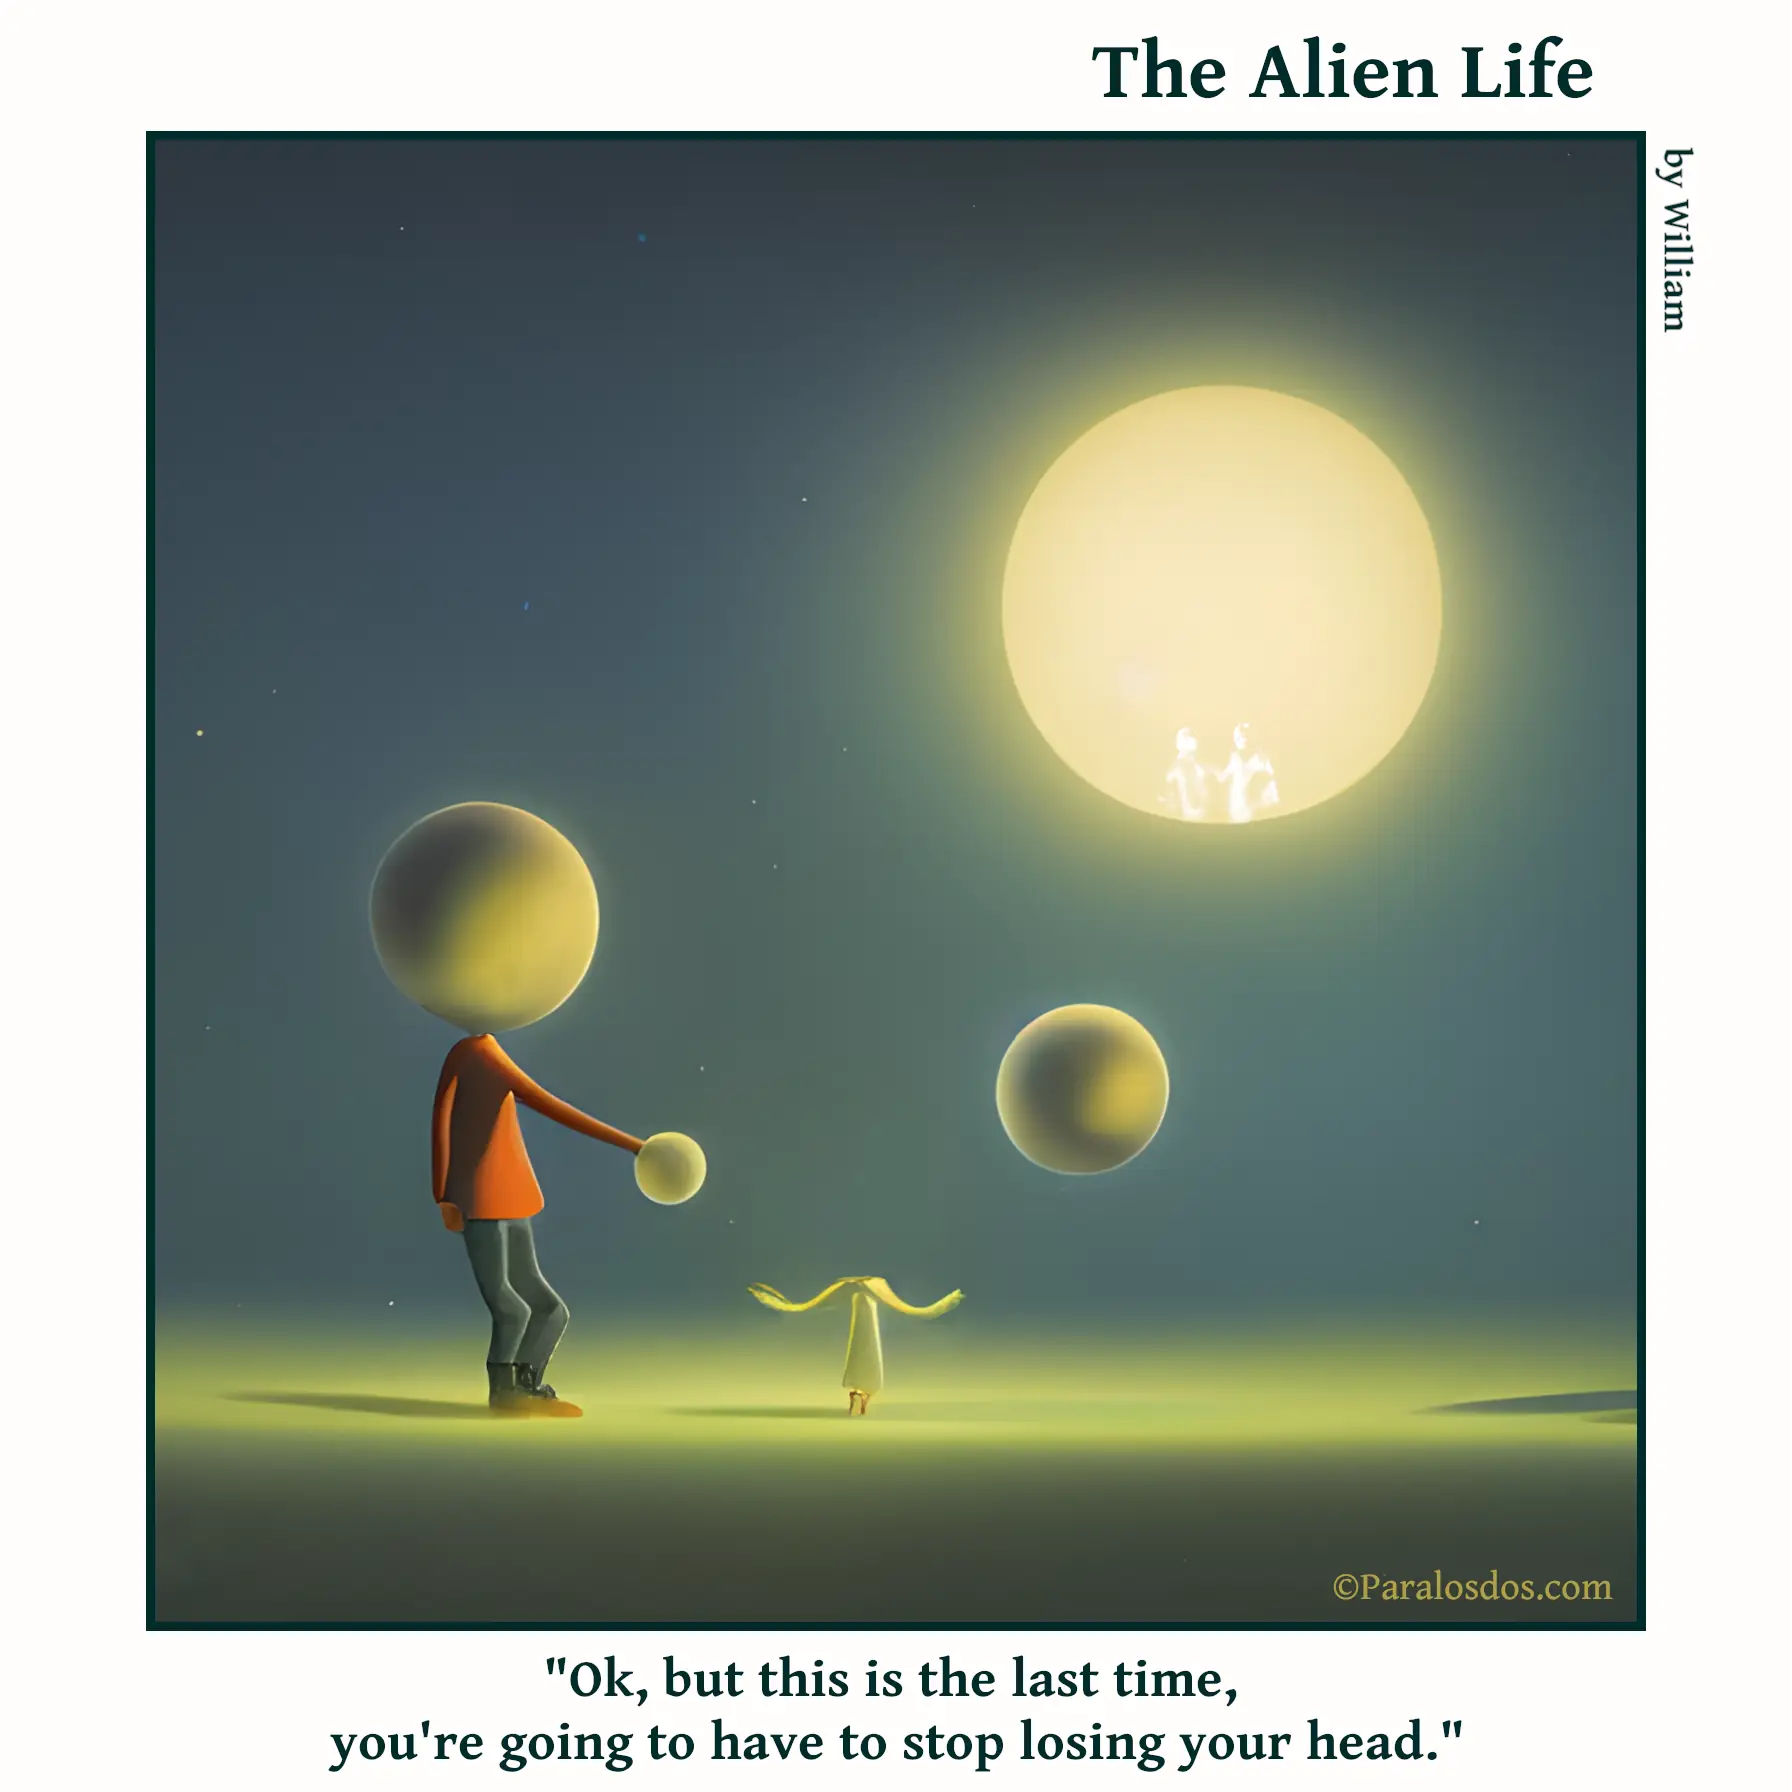 The Alien Life, one panel Comic. An alien Dad is standing beside an alien child whose round head has floated away. He is handing her a new round head. The caption reads: "Ok, but this is the last time, you're gong to have to stop losing your head."